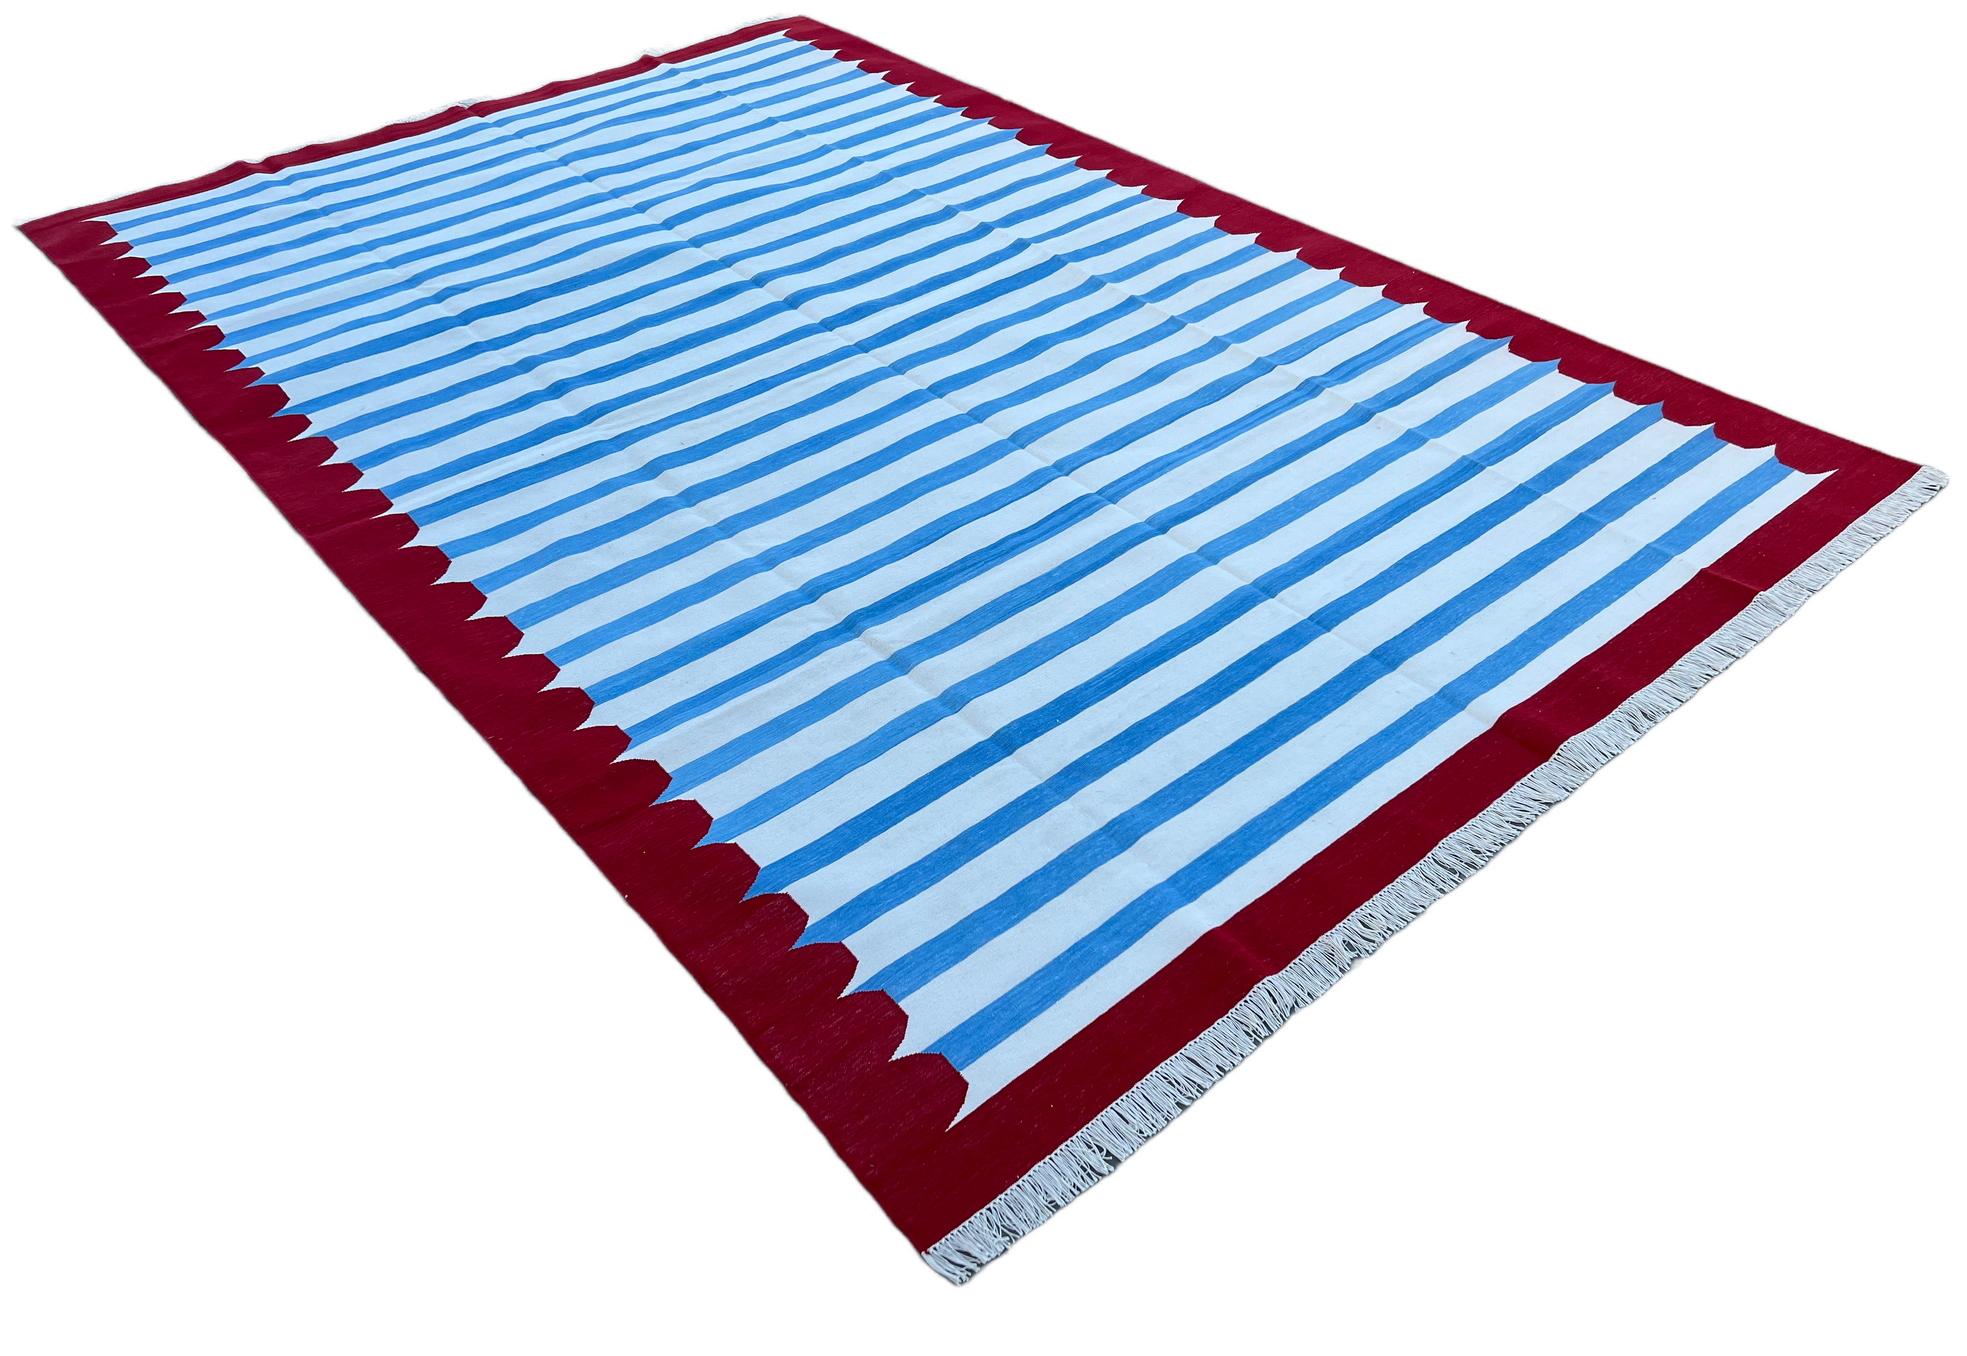 Cotton Vegetable Dyed Blue, White And Red Striped Indian Dhurrie Rug-8'x10' 
These special flat-weave dhurries are hand-woven with 15 ply 100% cotton yarn. Due to the special manufacturing techniques used to create our rugs, the size and color of